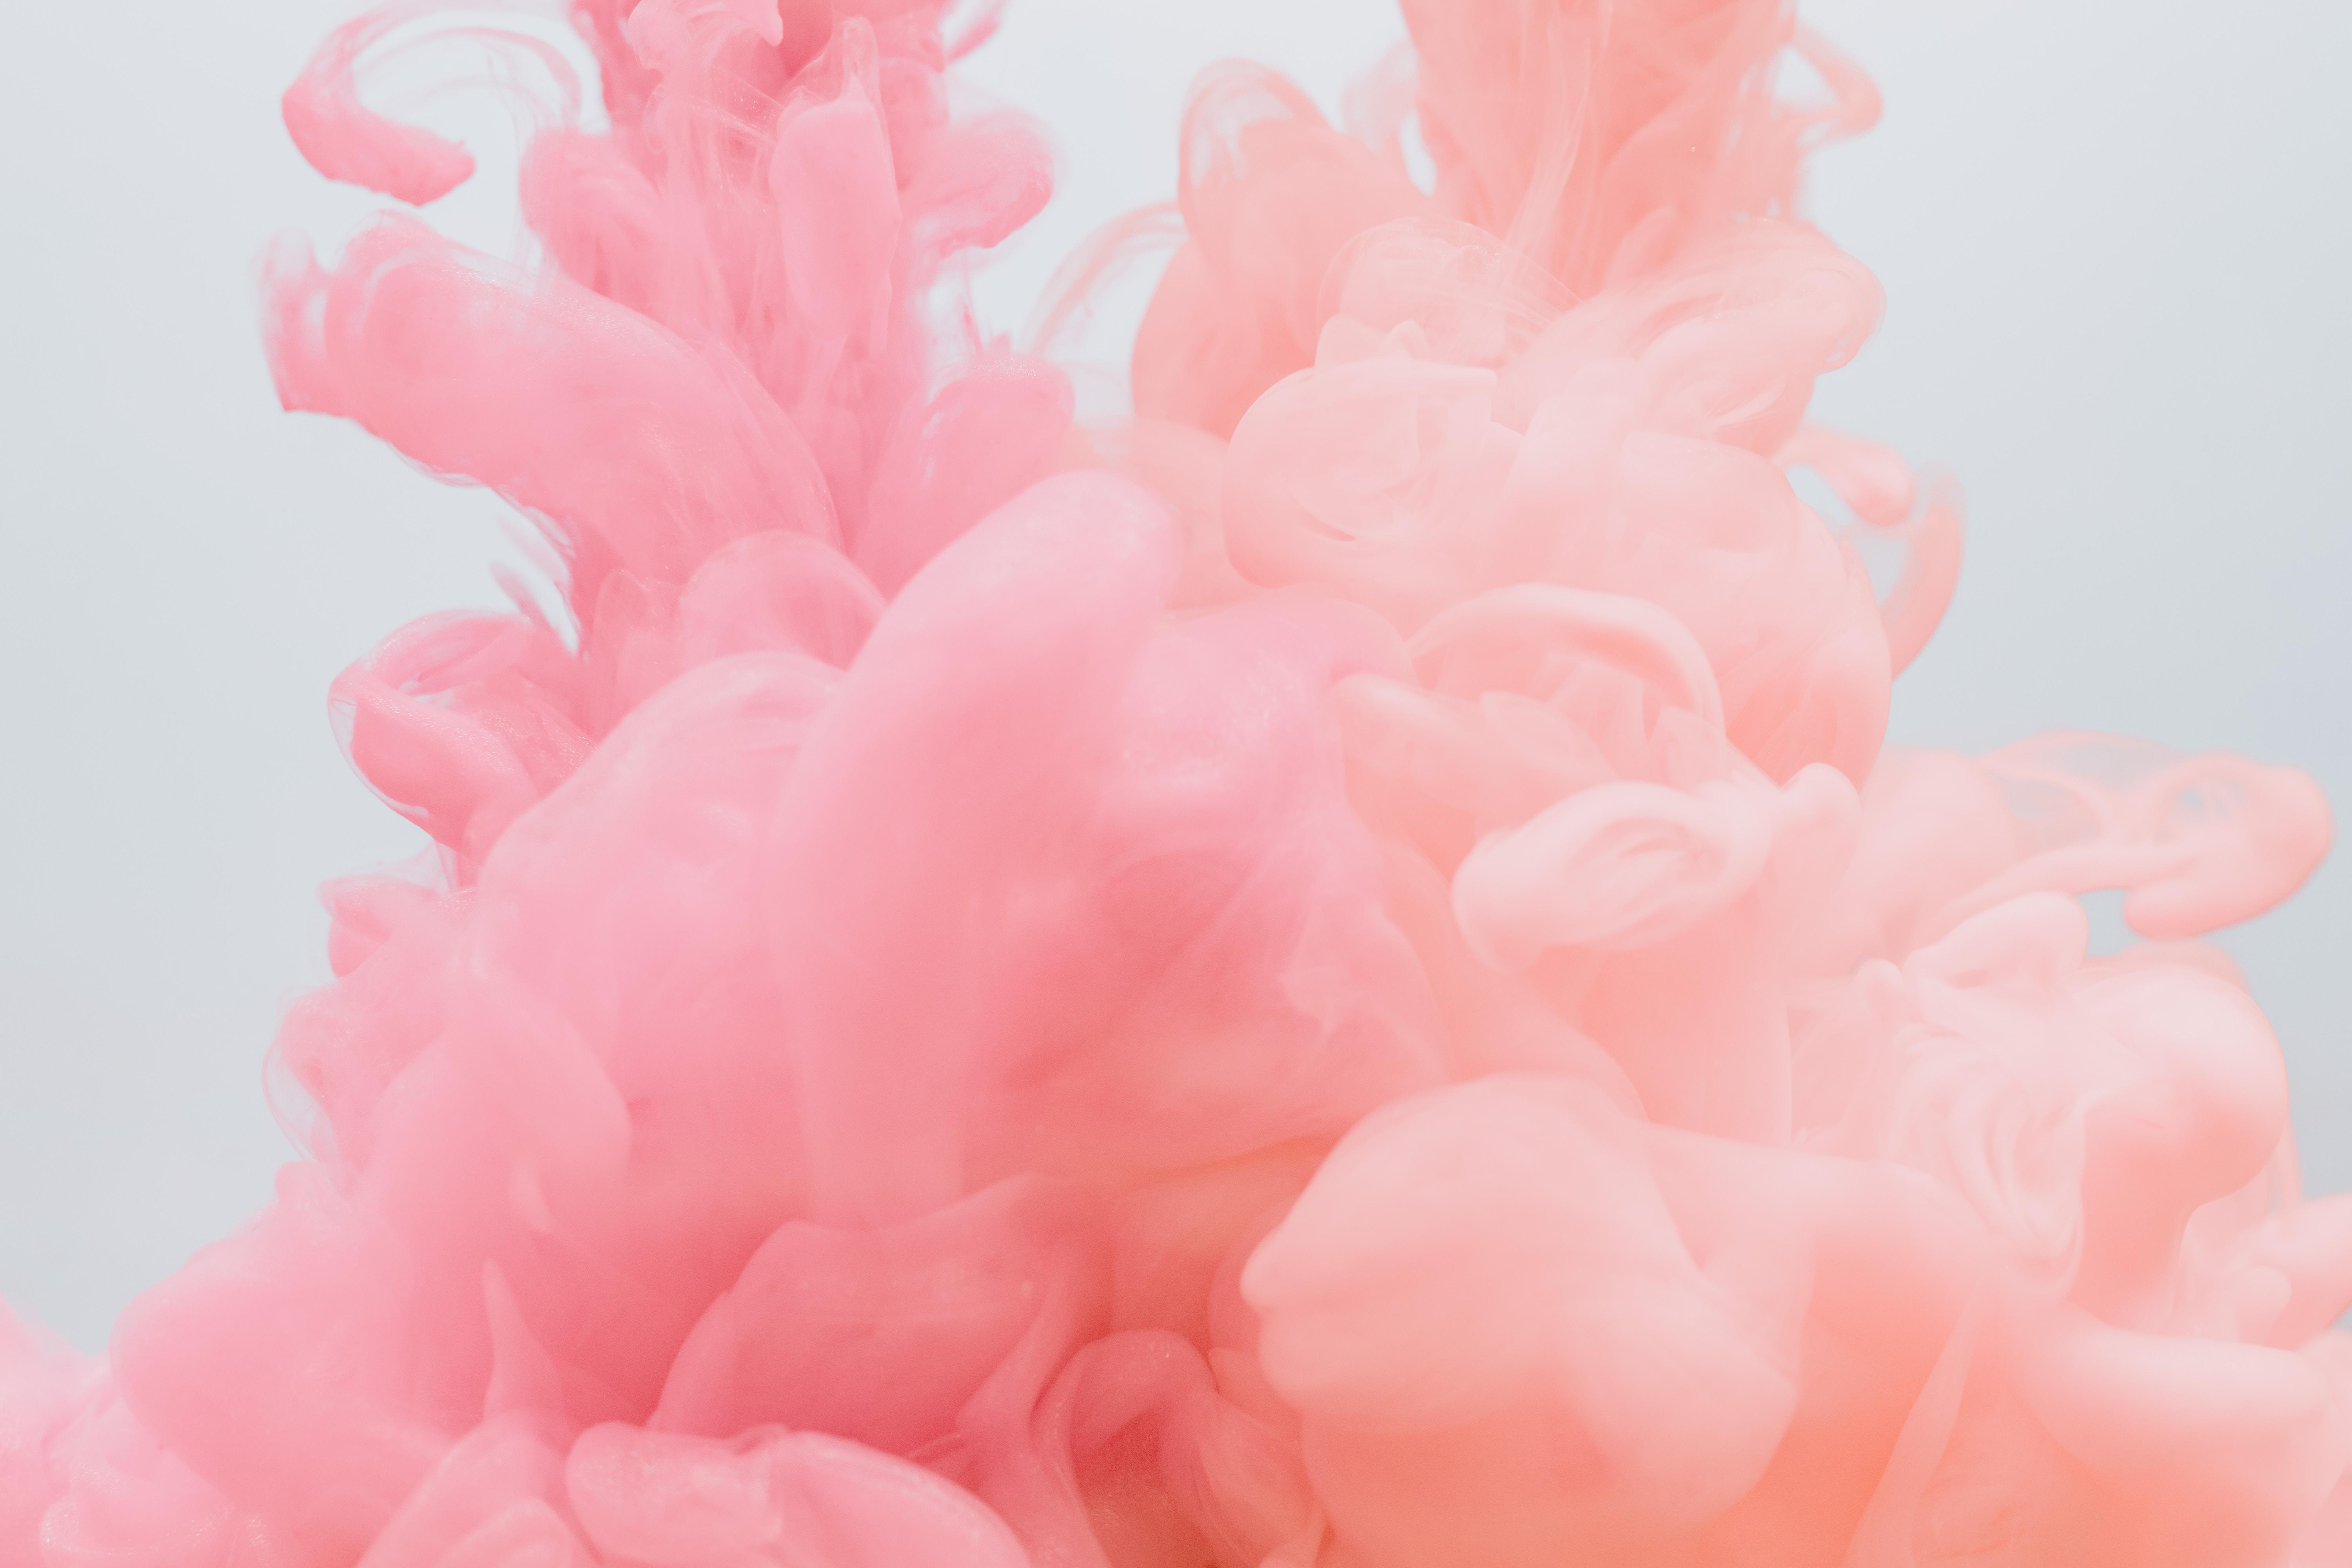 6000 x 4000 · jpeg - Pink Aesthetic 1920x1080 Wallpapers - Wallpaper Cave